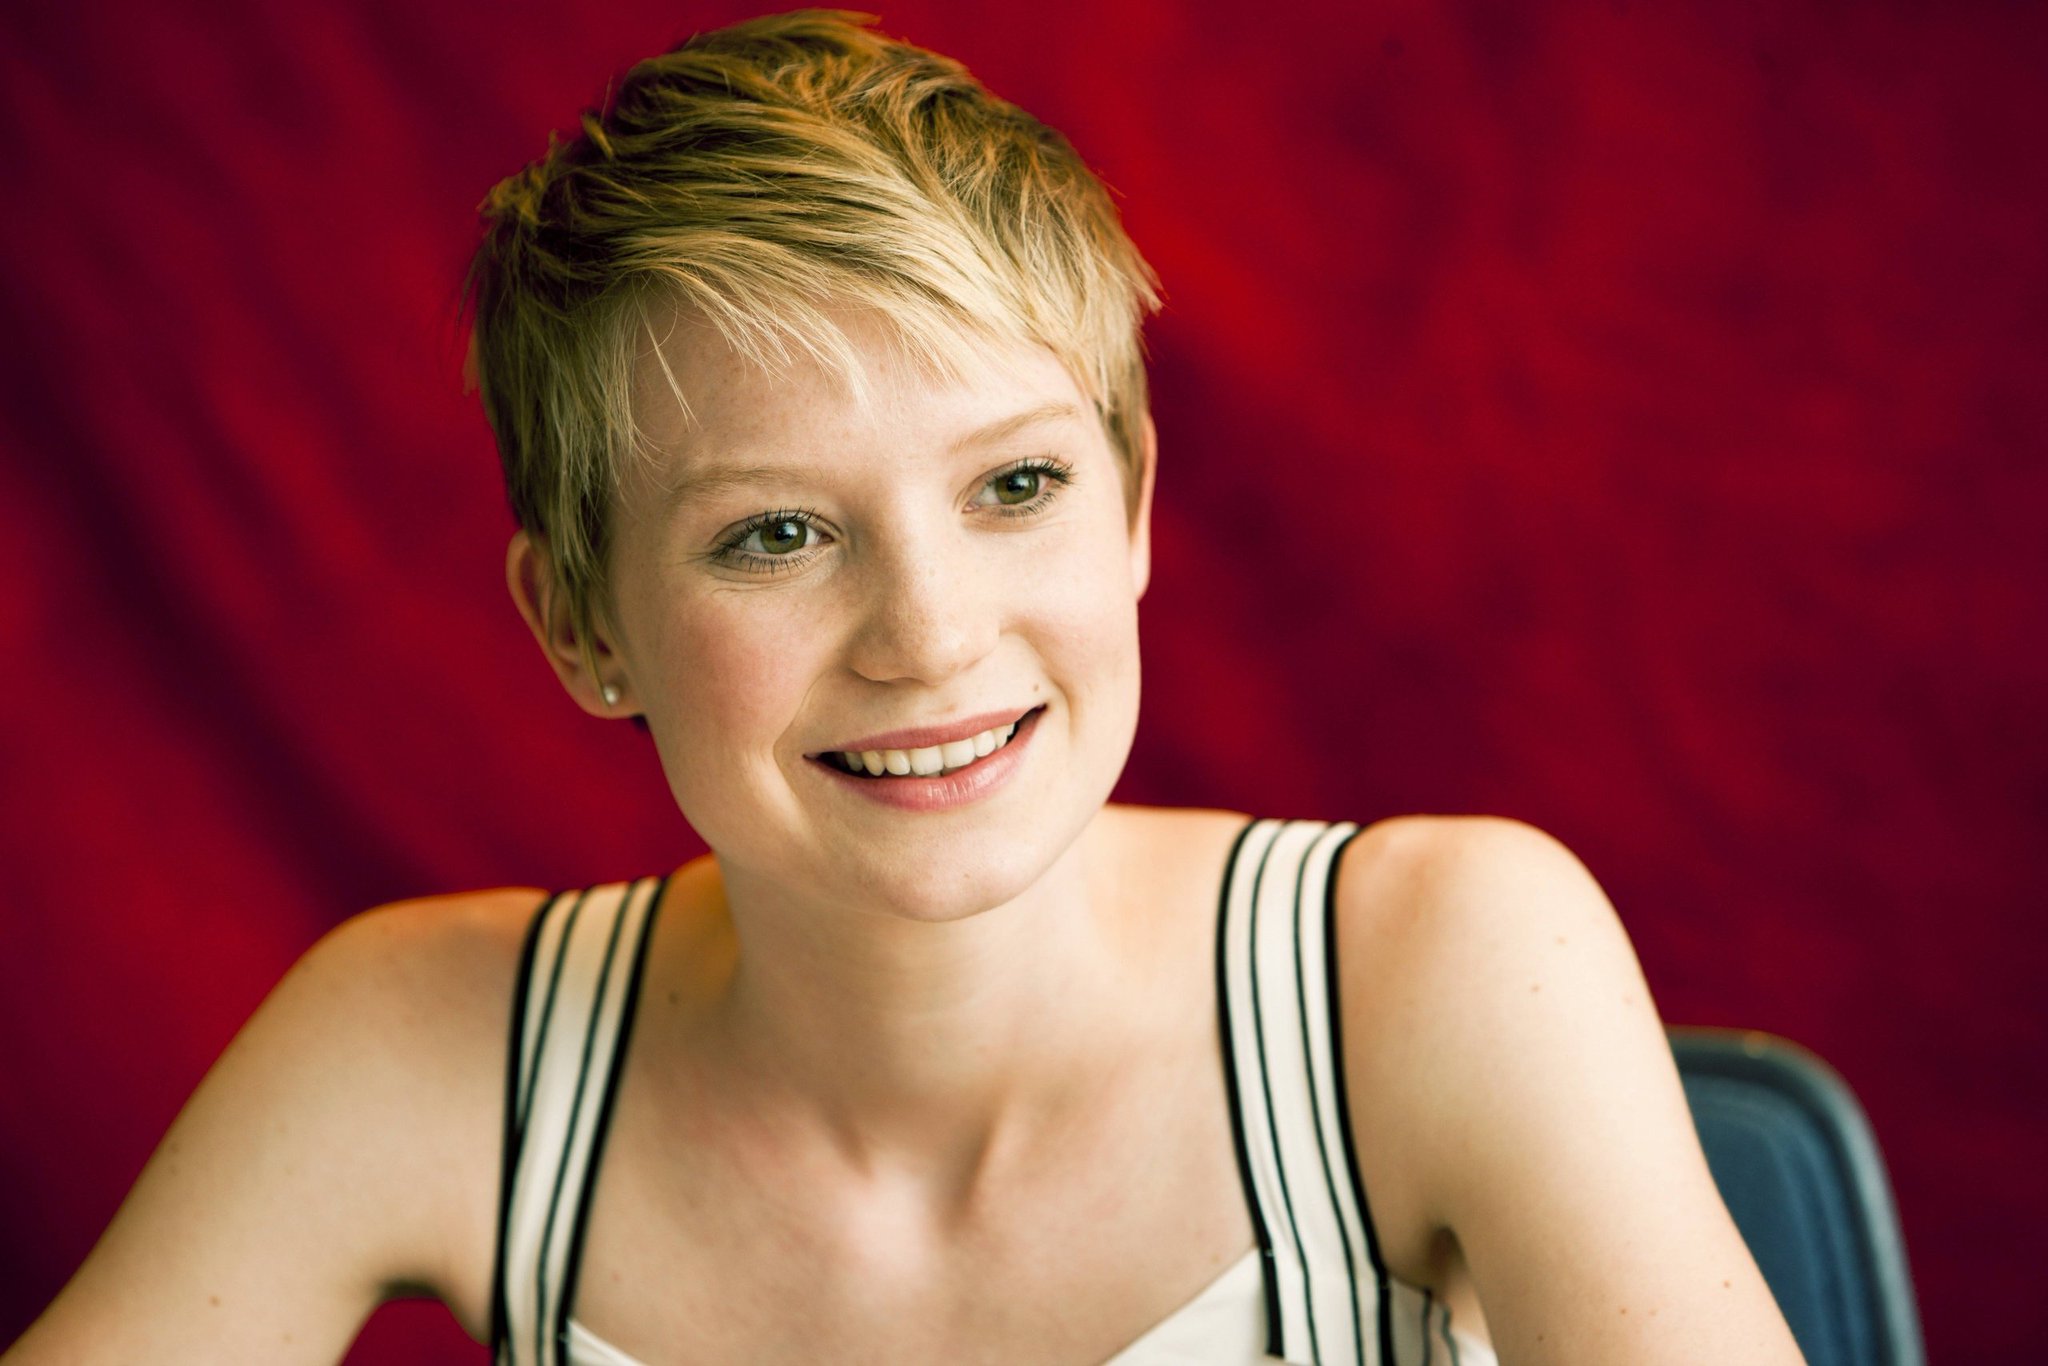 Happy Birthday to one of the best and most underrated actresses working today, Mia Wasikowska! 